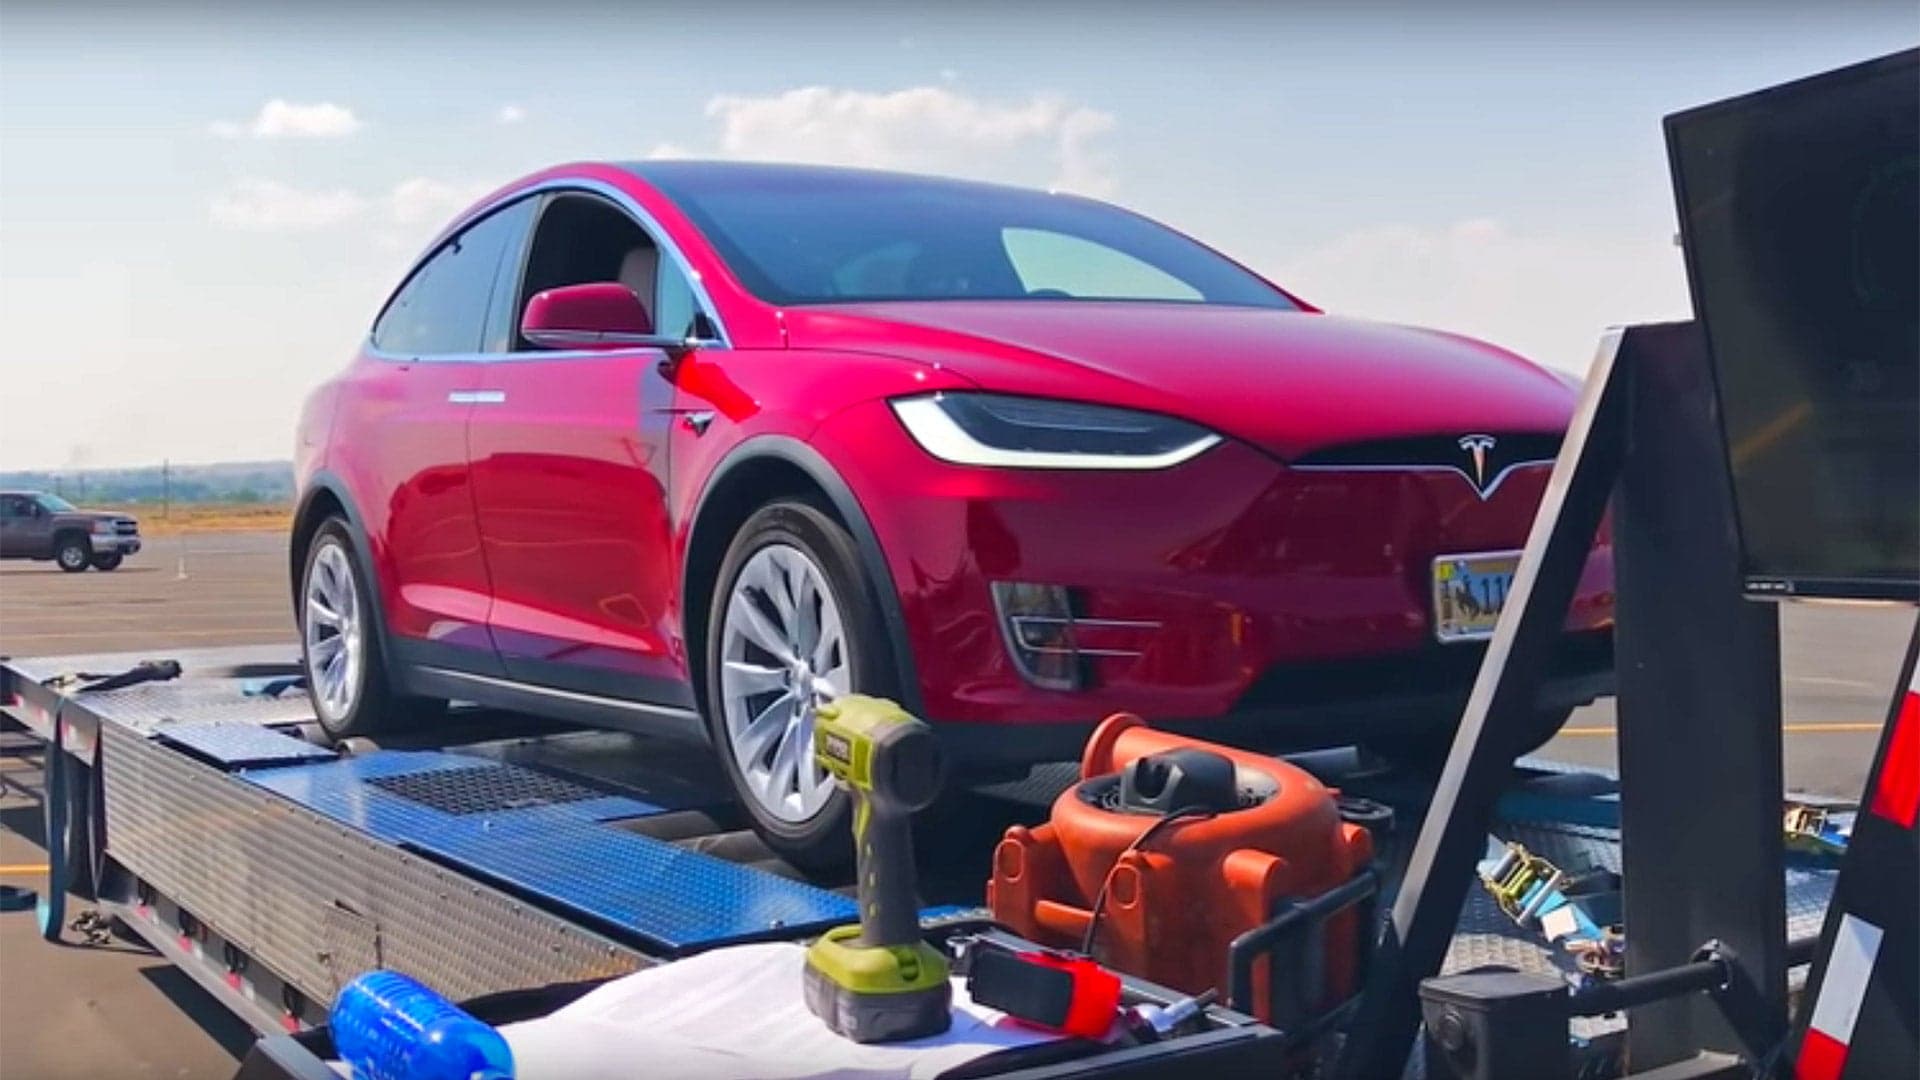 Watch This Tesla Model X Deliver More Horsepower Than Expected on the Dyno